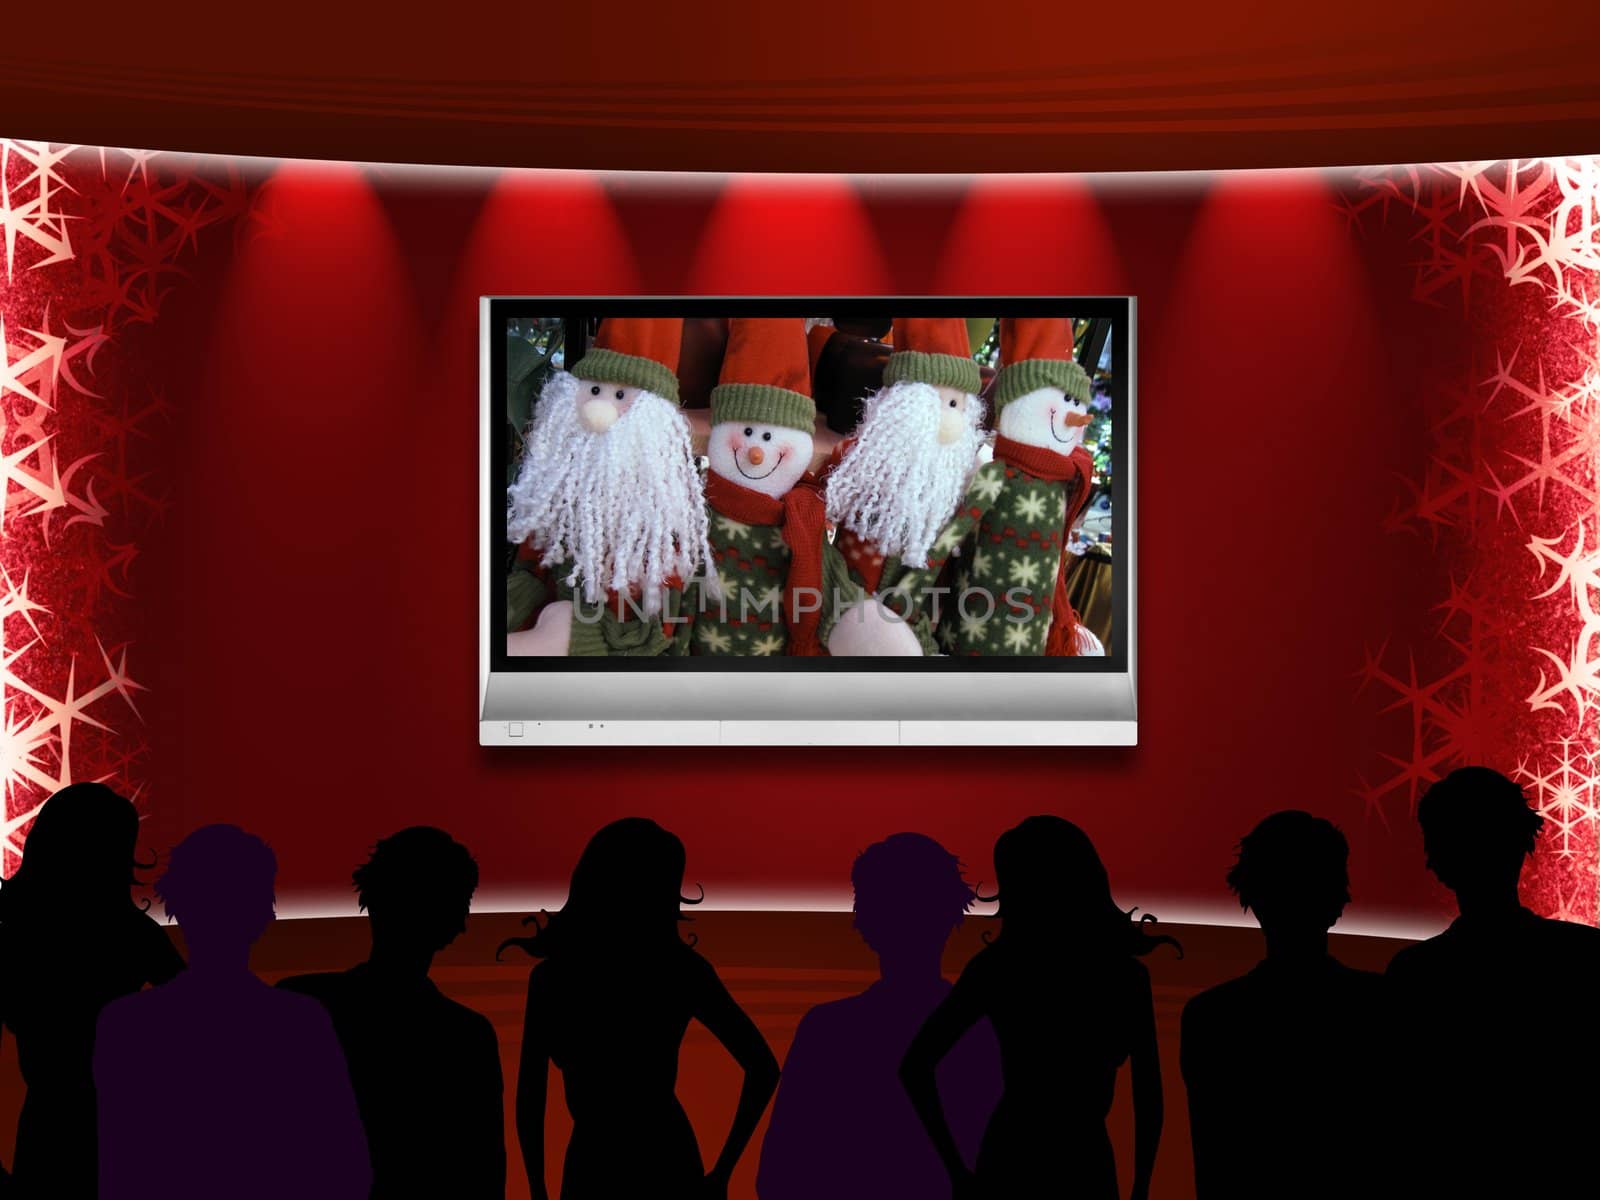 Christmas theater with telly on the wall